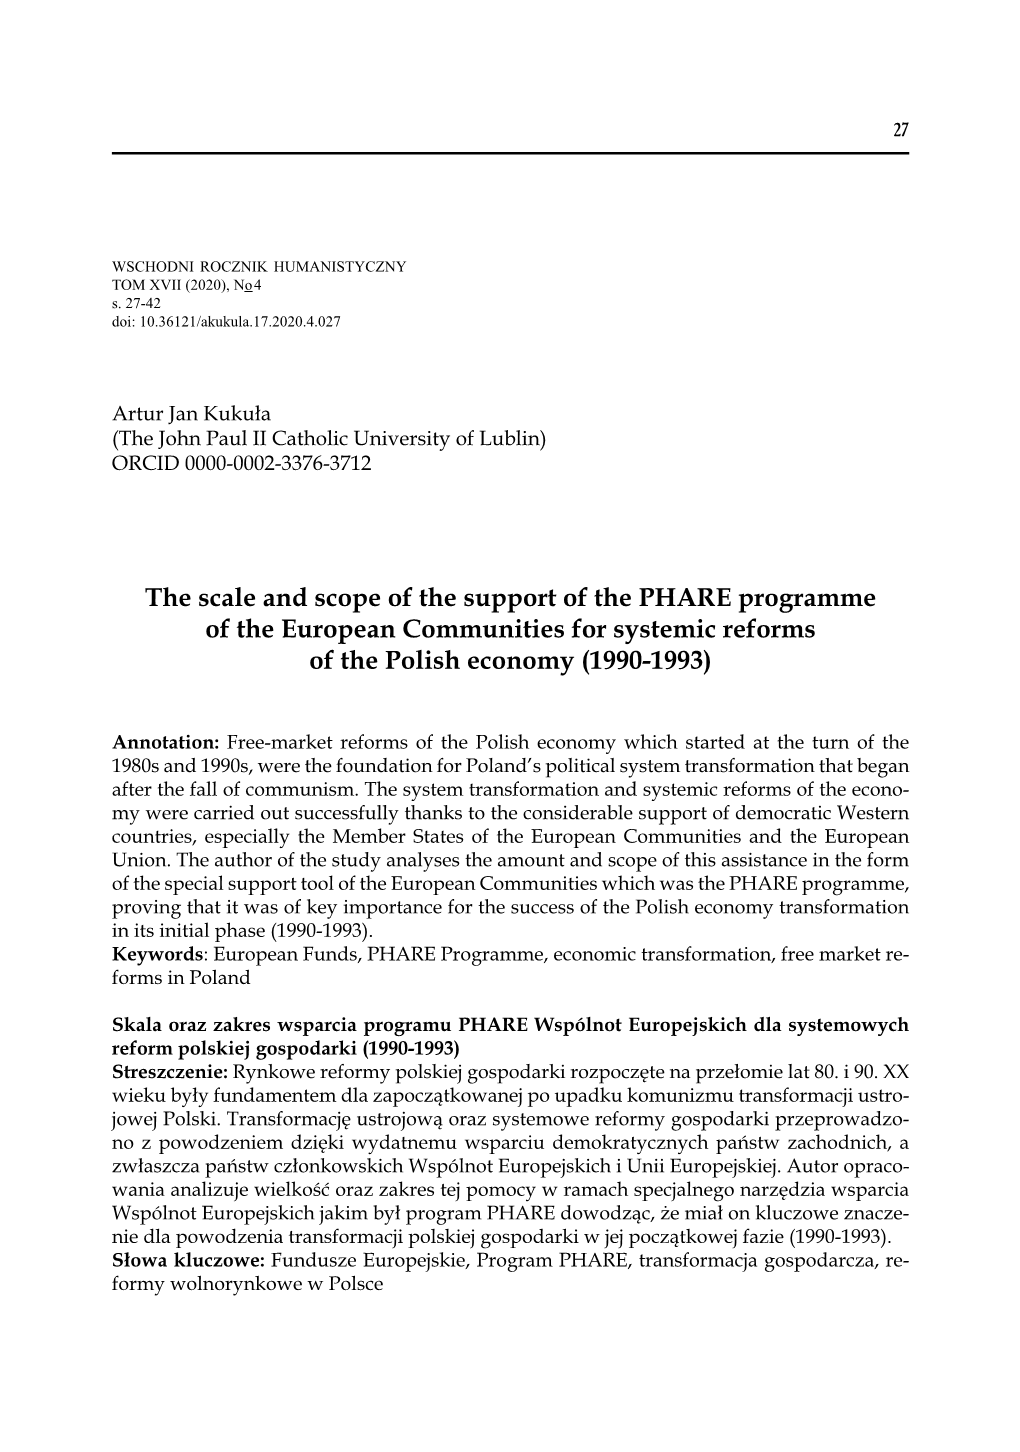 The Scale and Scope of the Support of the PHARE Programme of the European Communities for Systemic Reforms of the Polish Economy (1990-1993)